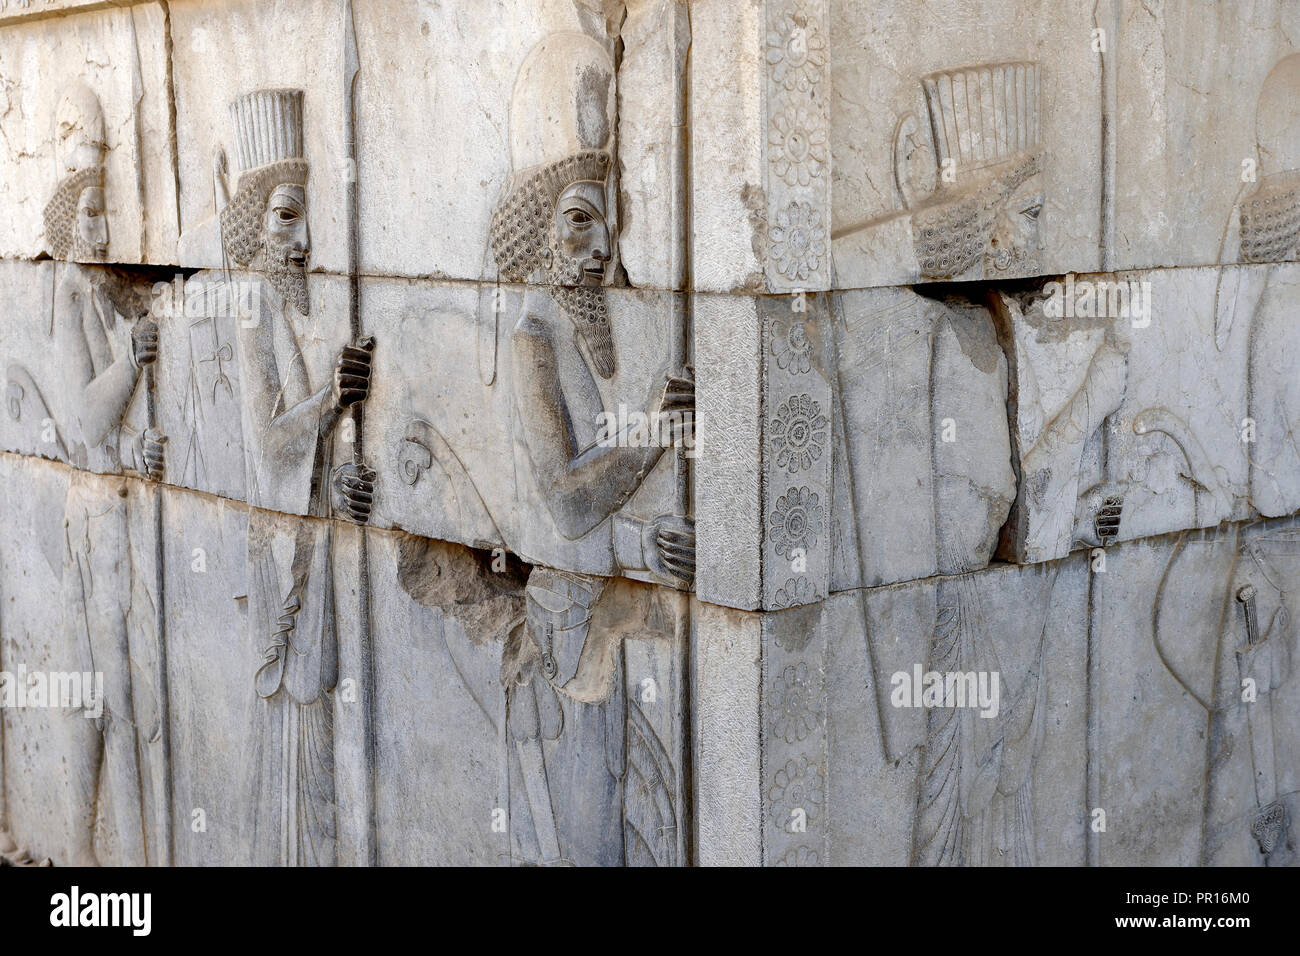 Depiction of united Medes and Persians, the monumental stairs of the Apadana, Persepolis, Iran, Middle East Stock Photo